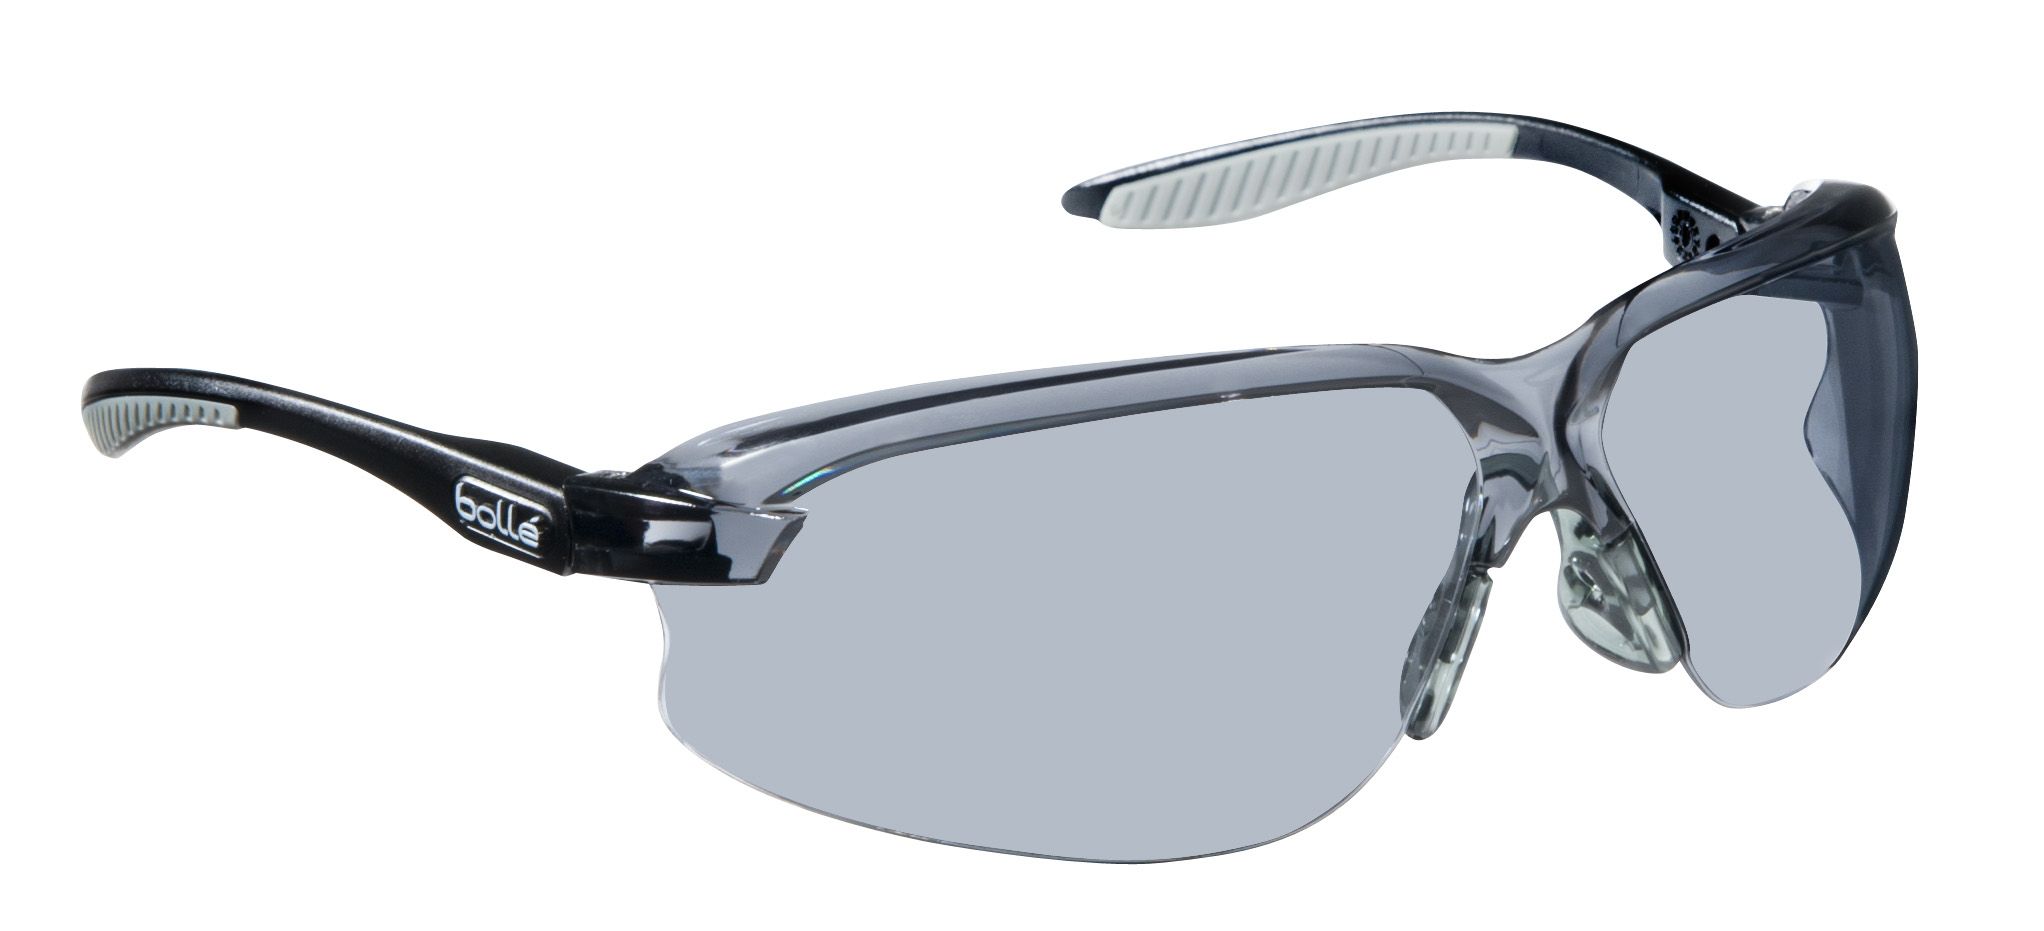 Bolle AXIS Anti-Mist UV Safety Glasses, Smoke Polycarbonate Lens, Vented